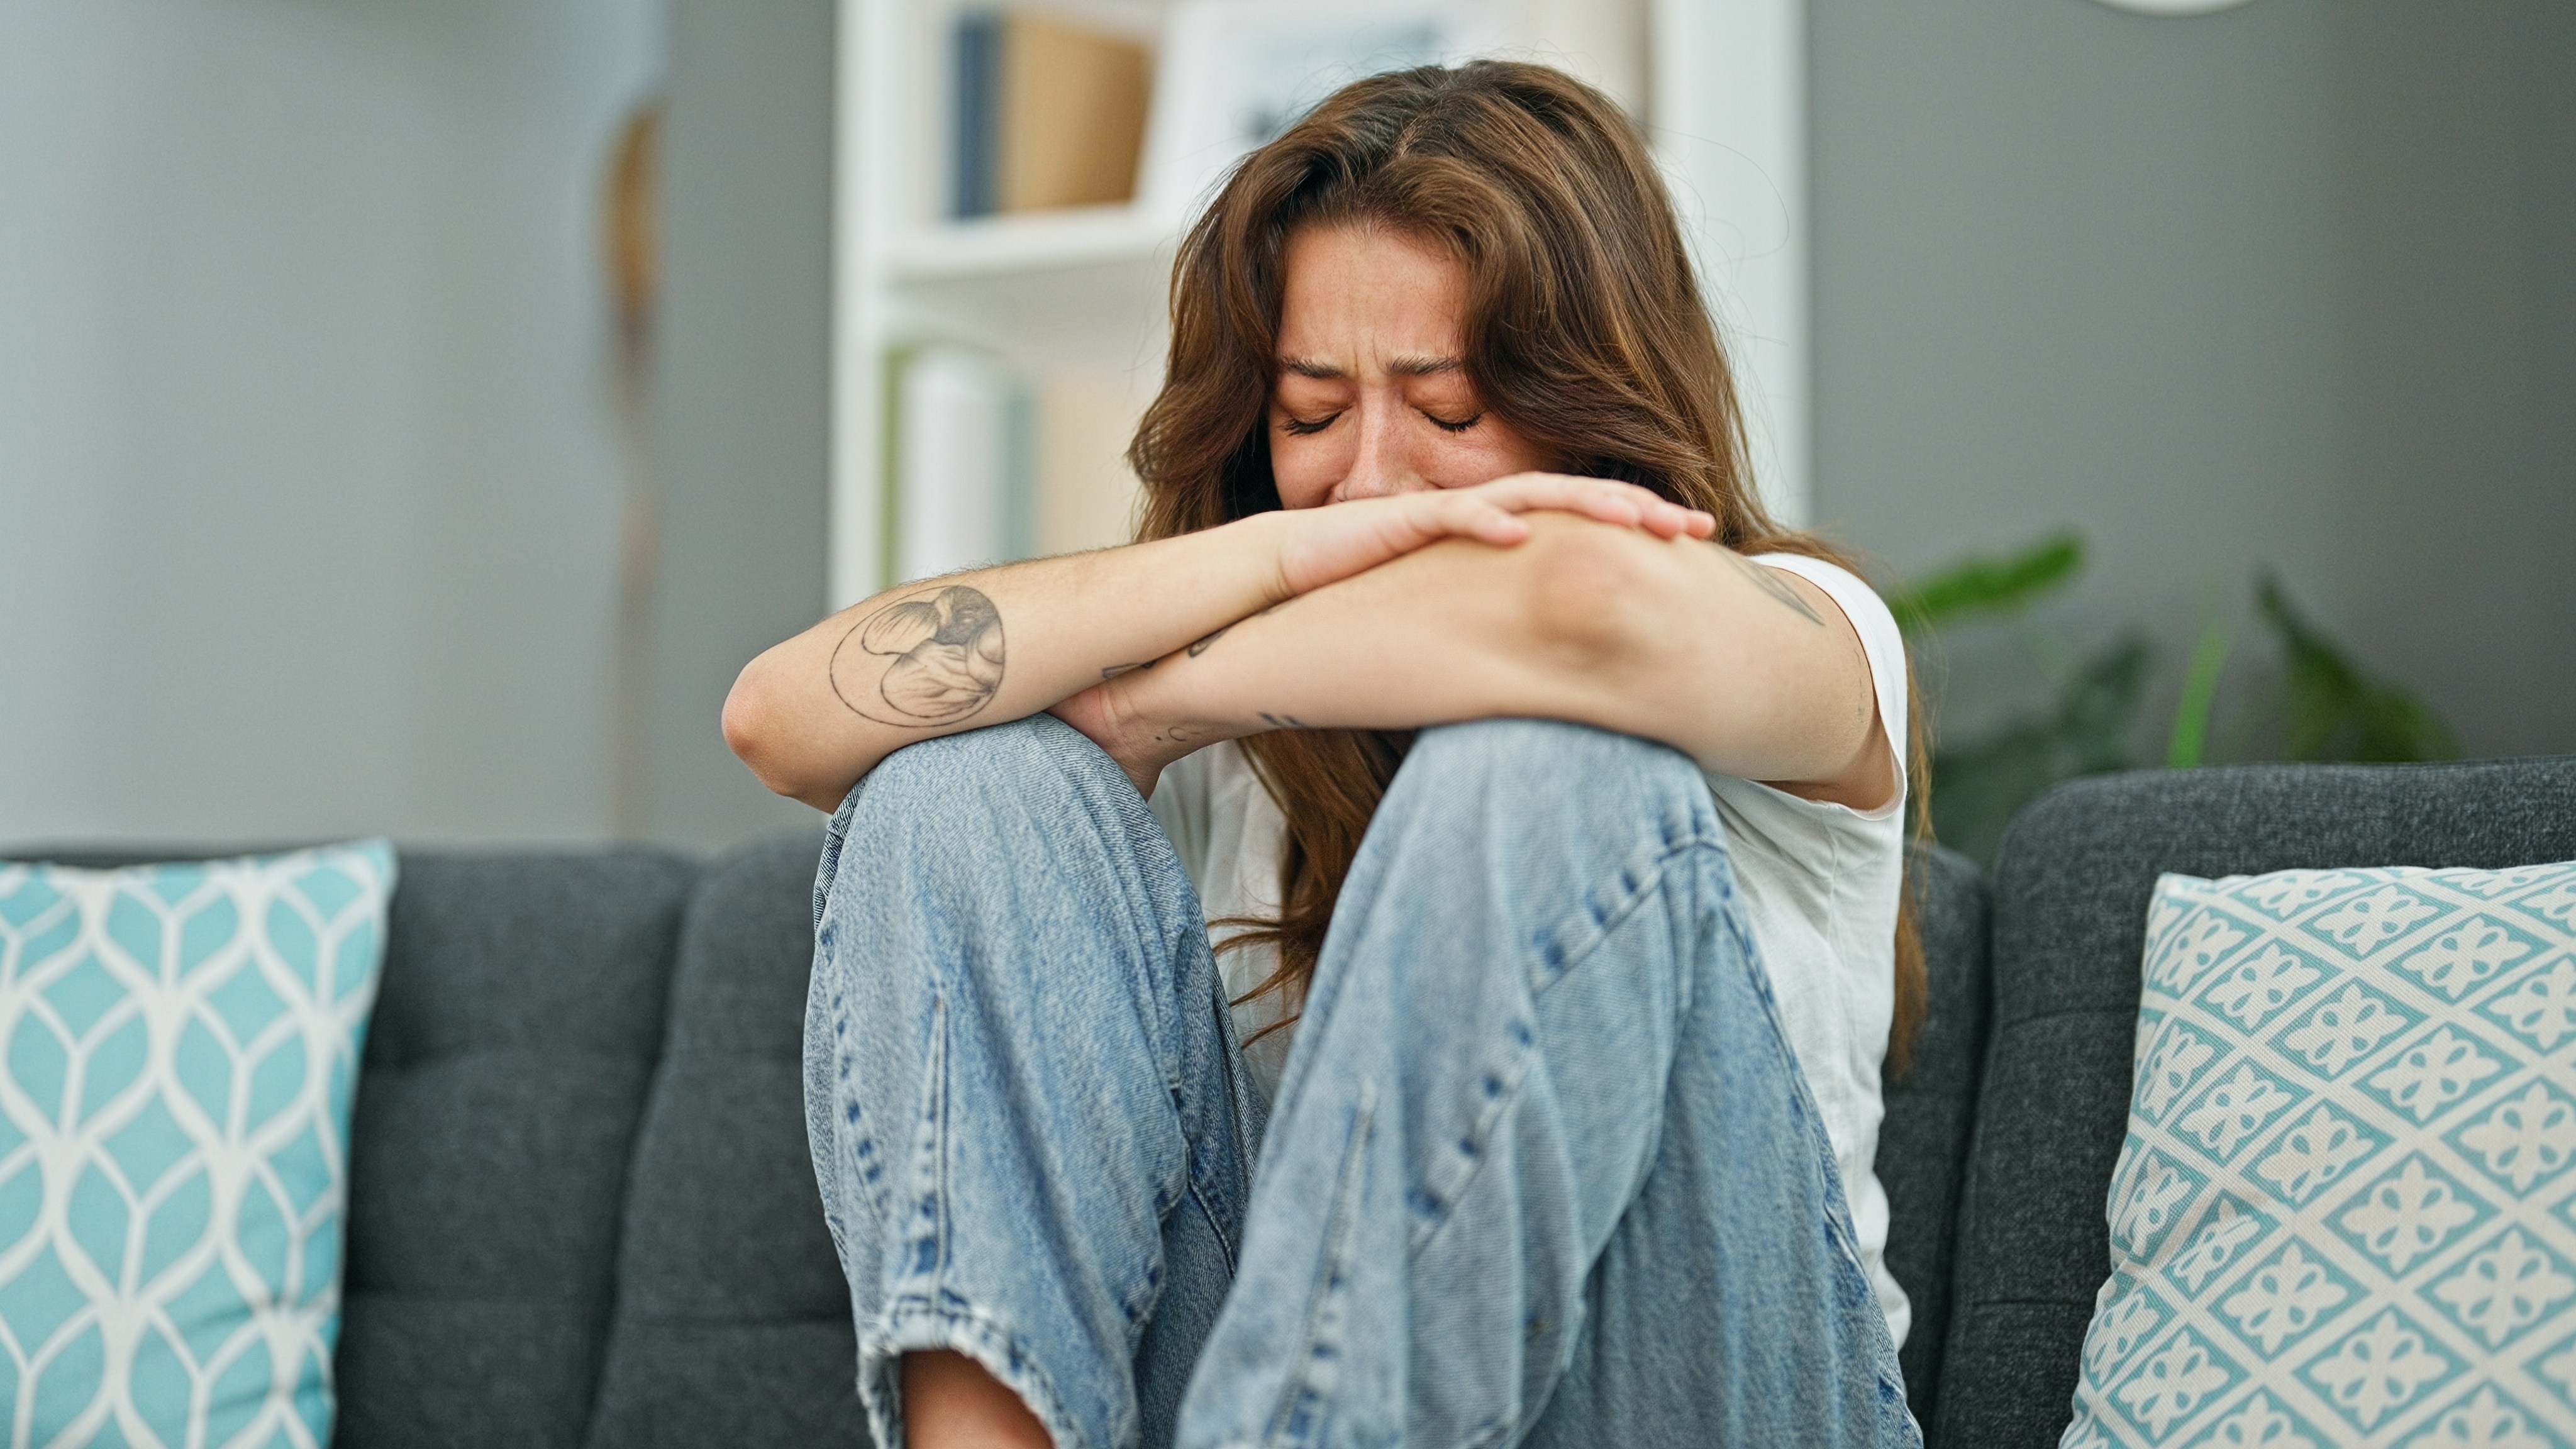 Crying woman on sofa  | Shutterstock